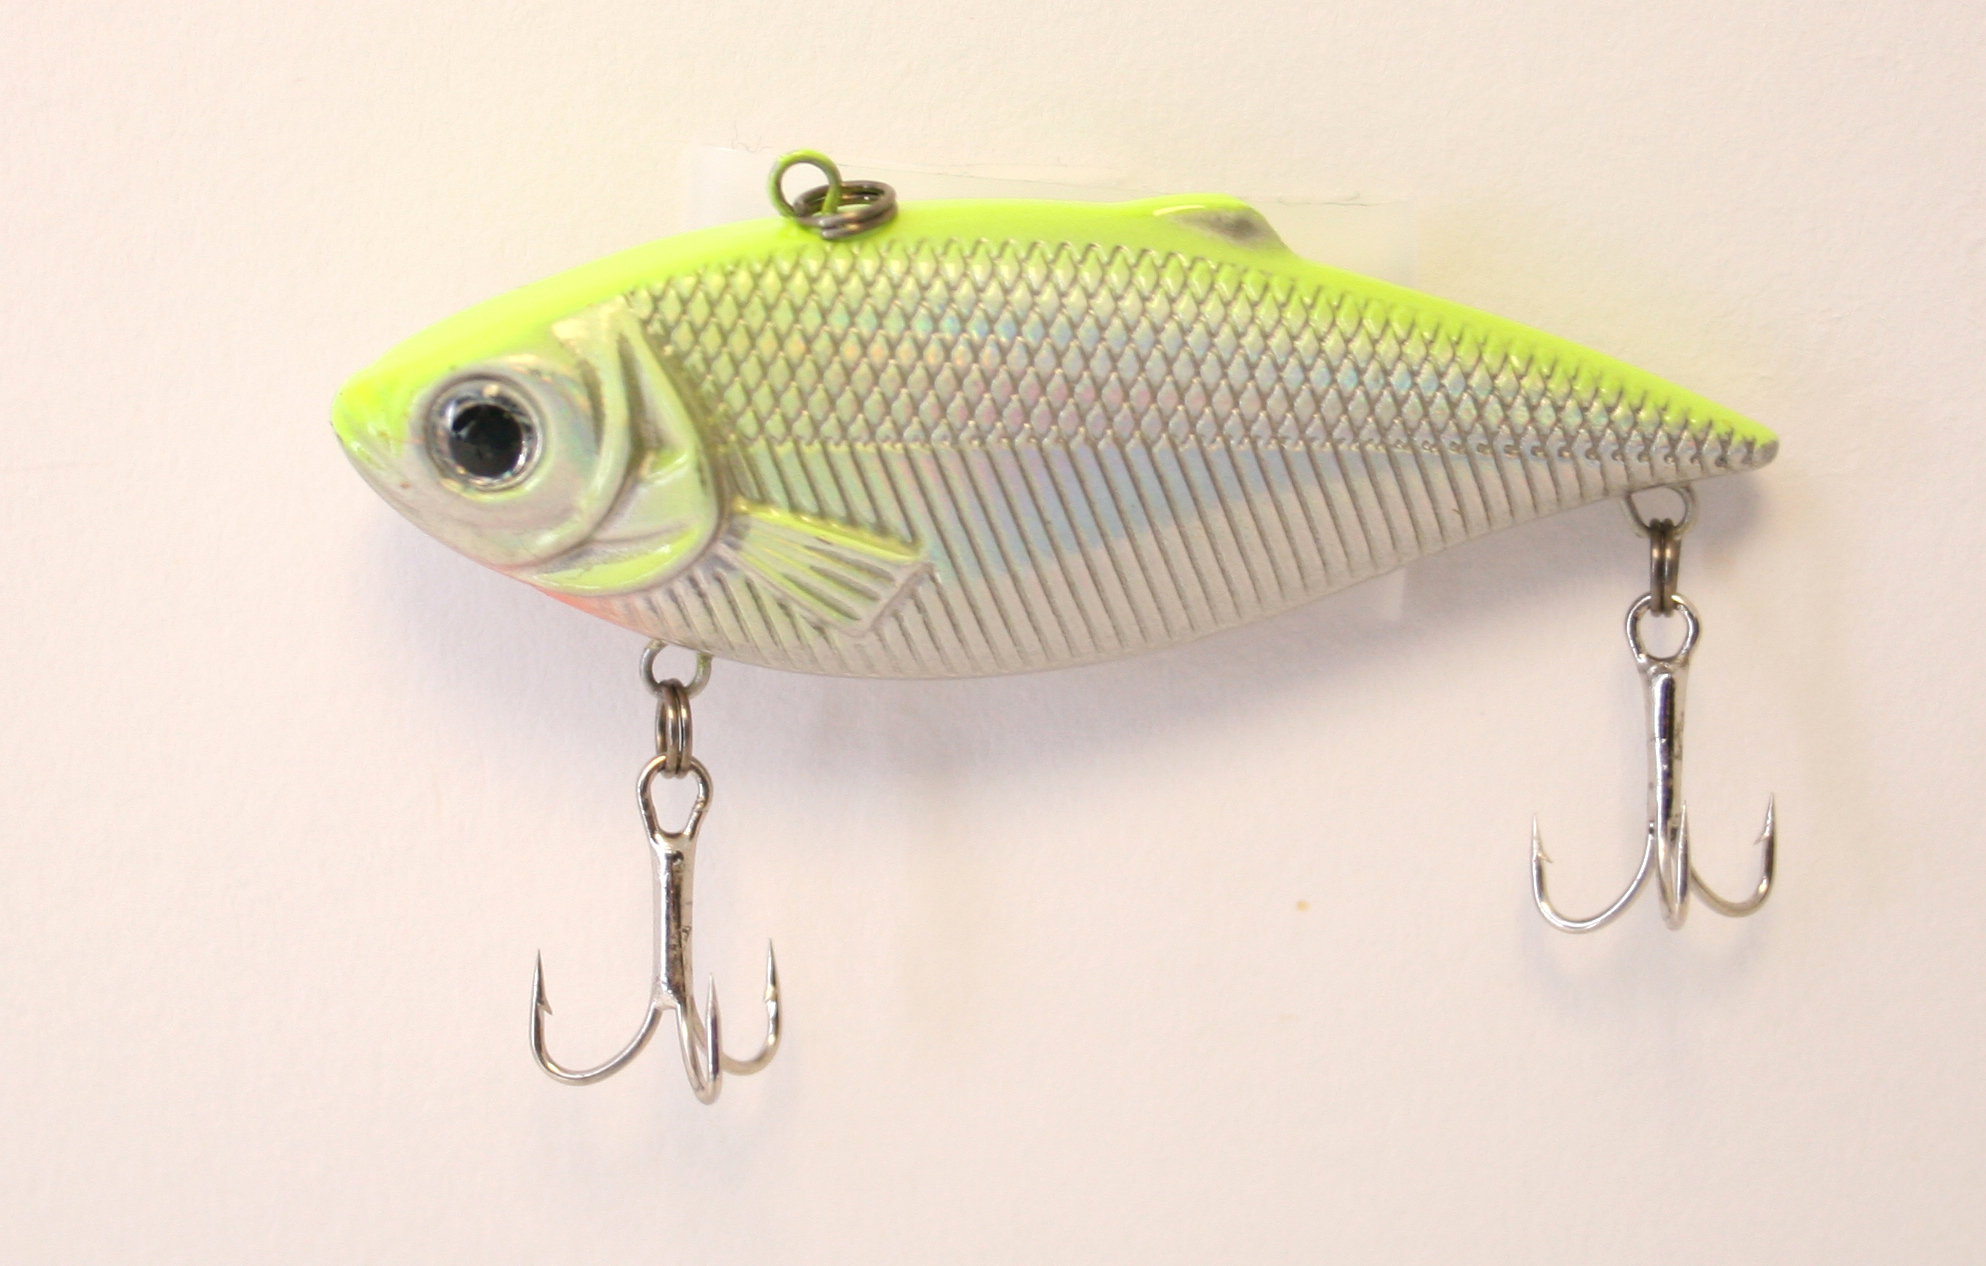 https://op1.0ps.us/original/opplanet-creme-lures-pond-favorites-lipless-crankbait-sinking-chartreuse-back-2-1-2in-1-per-pack-lcp99-main